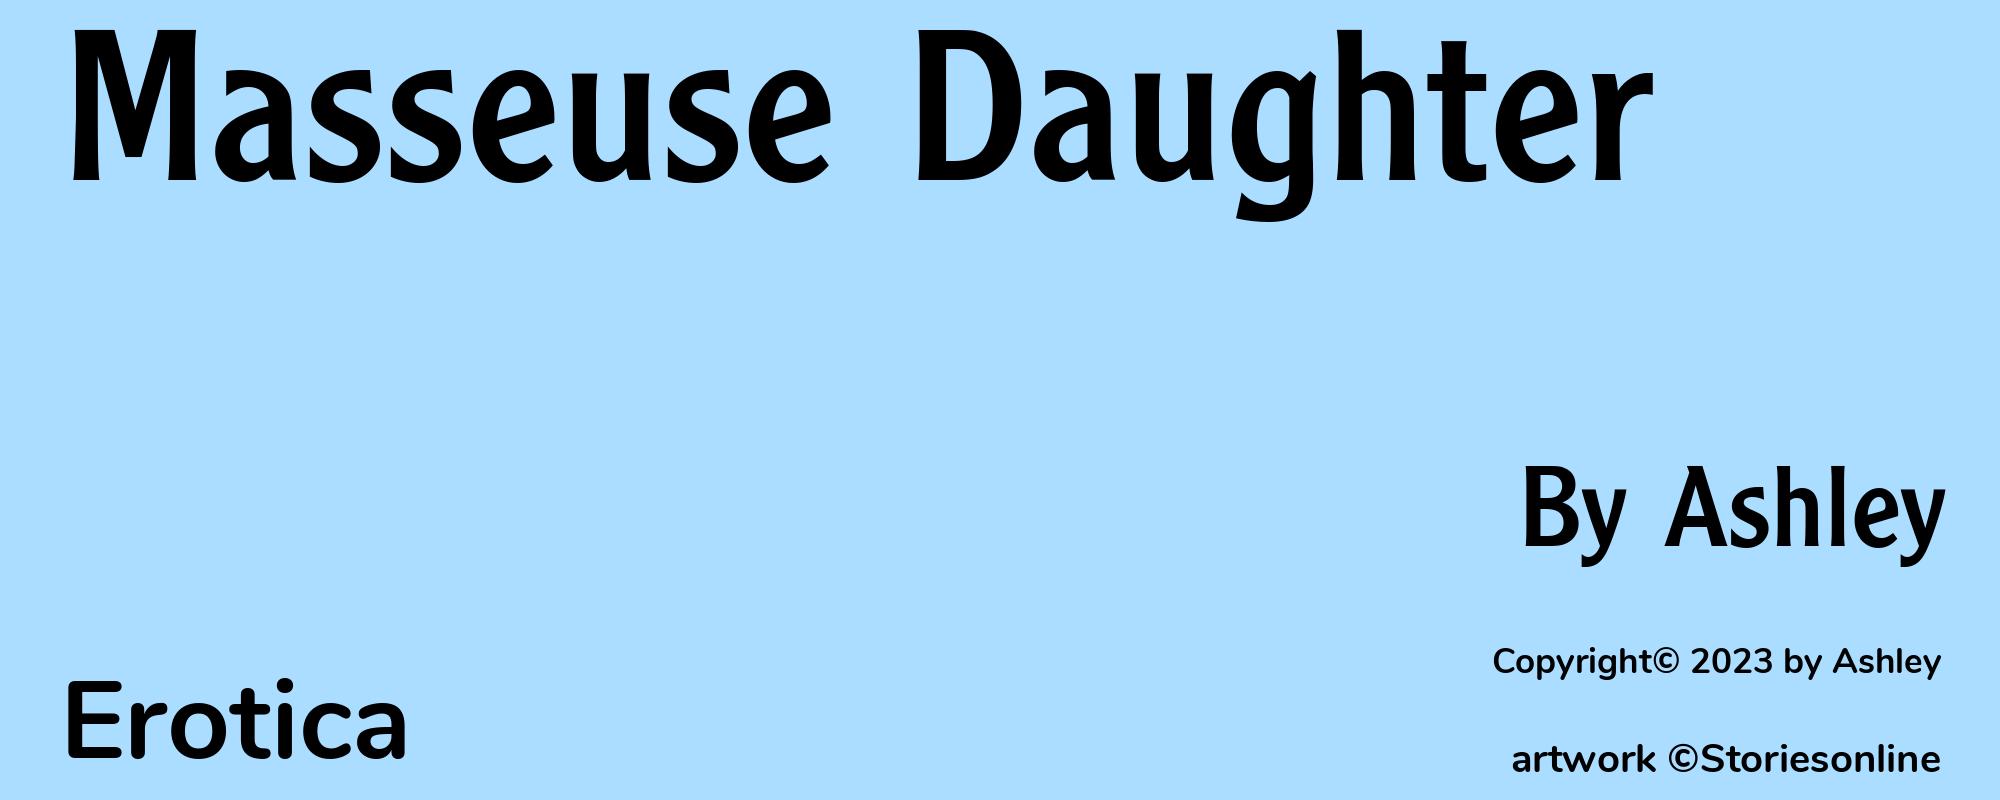 Masseuse Daughter - Cover